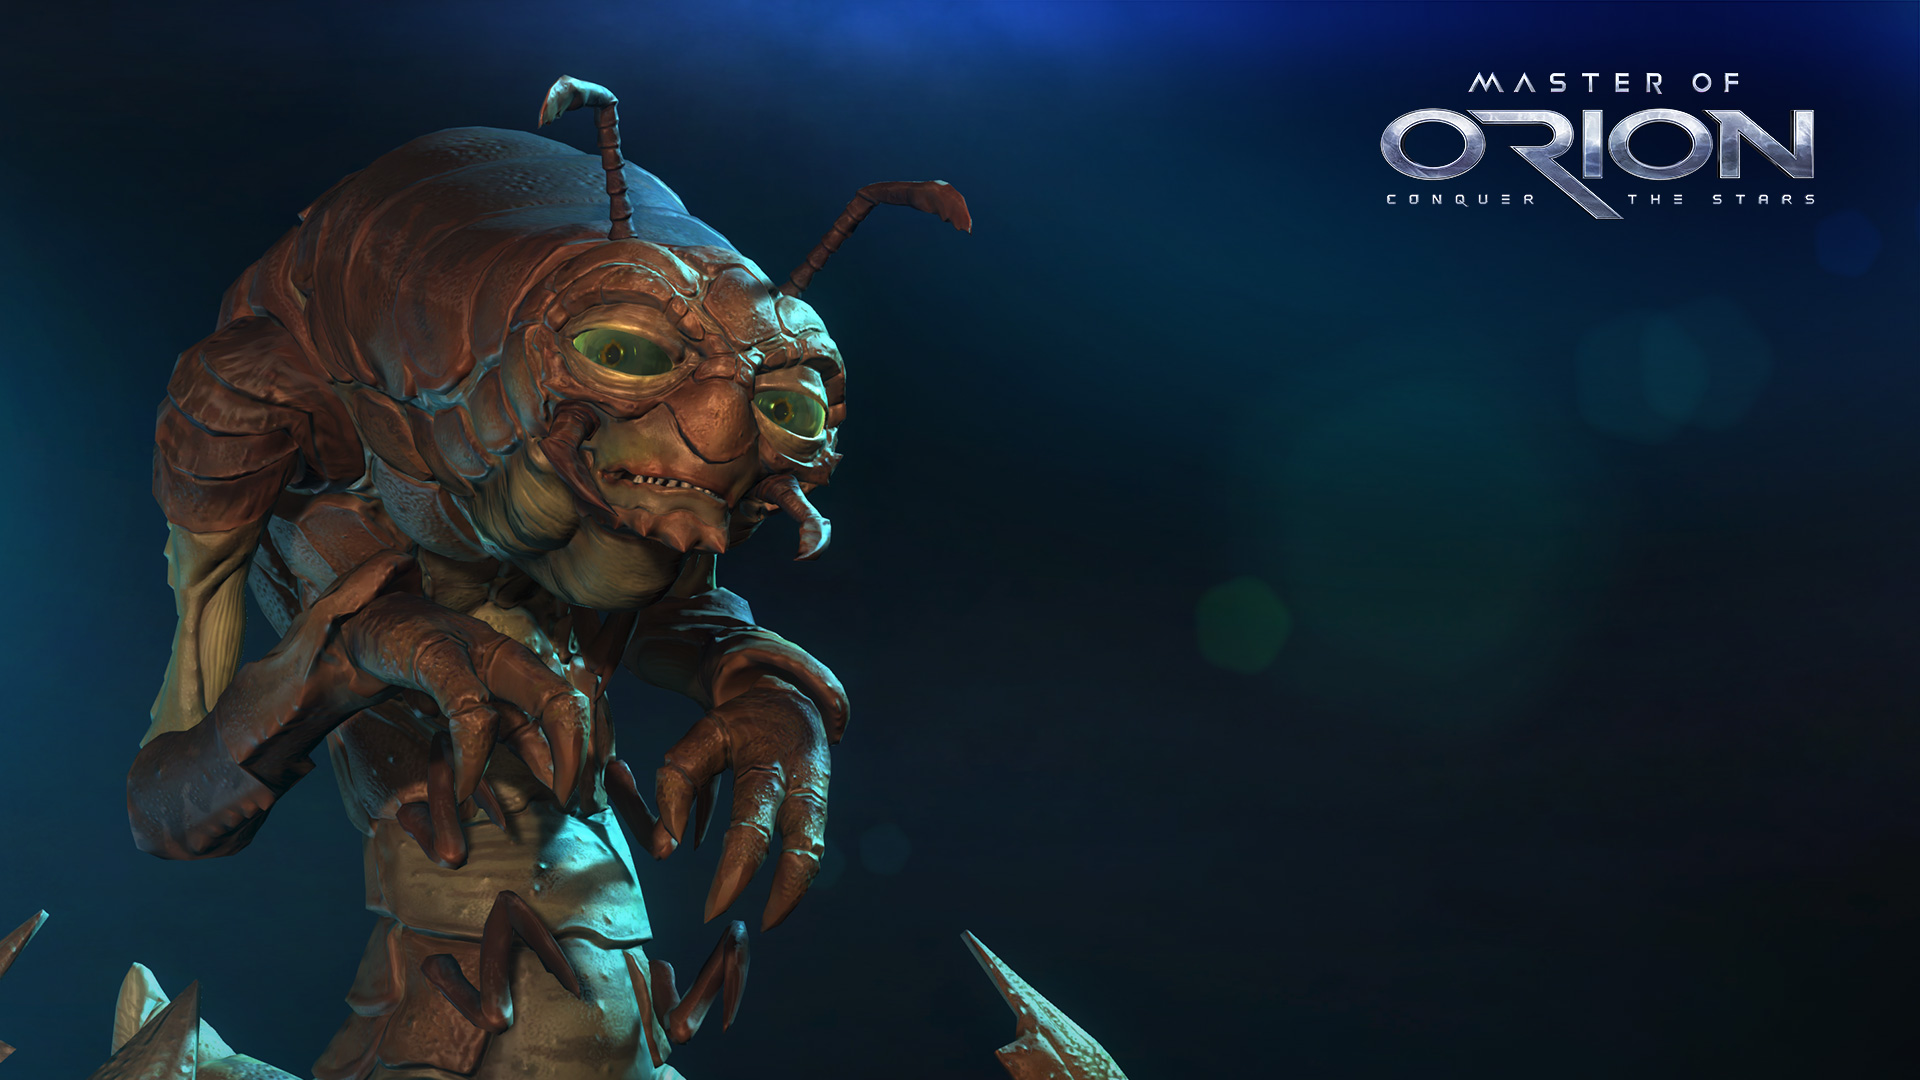 New races appeared in Master Of Orion